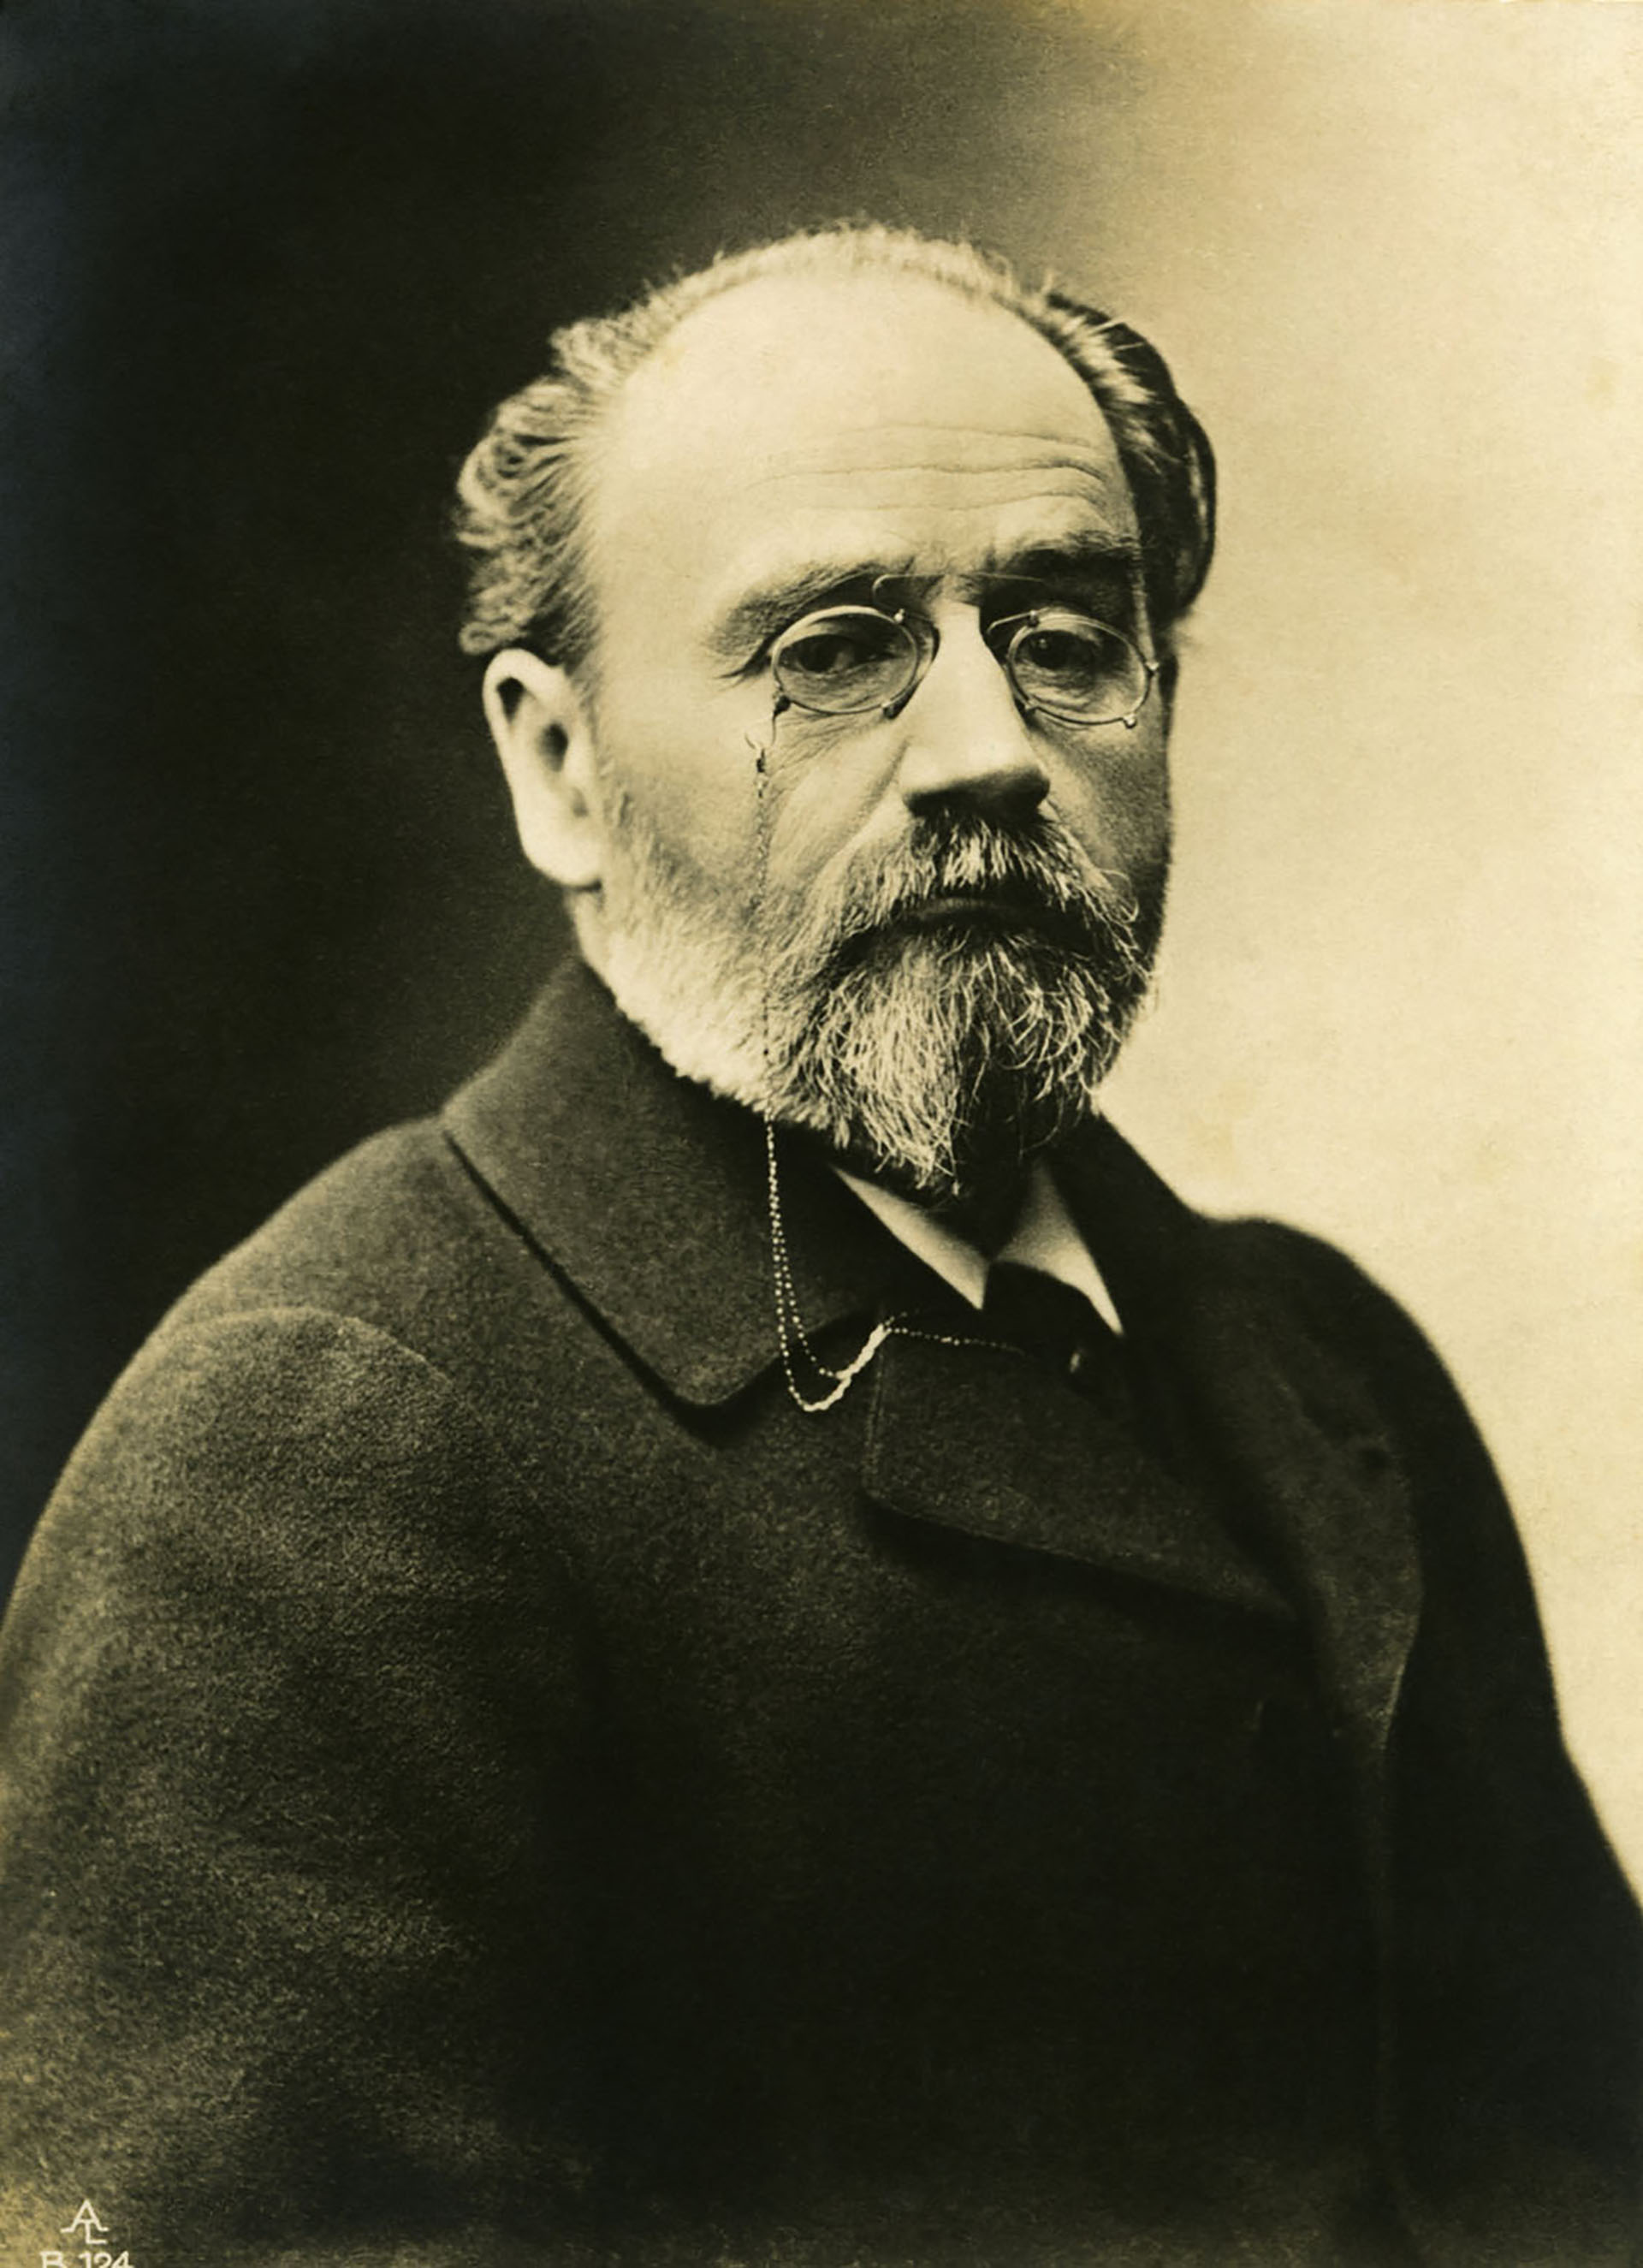 Emile Zola - portrait - French writer and novelist - 2 April 1840 - 29 September 1902  (Photo by Culture Club/Getty Images)